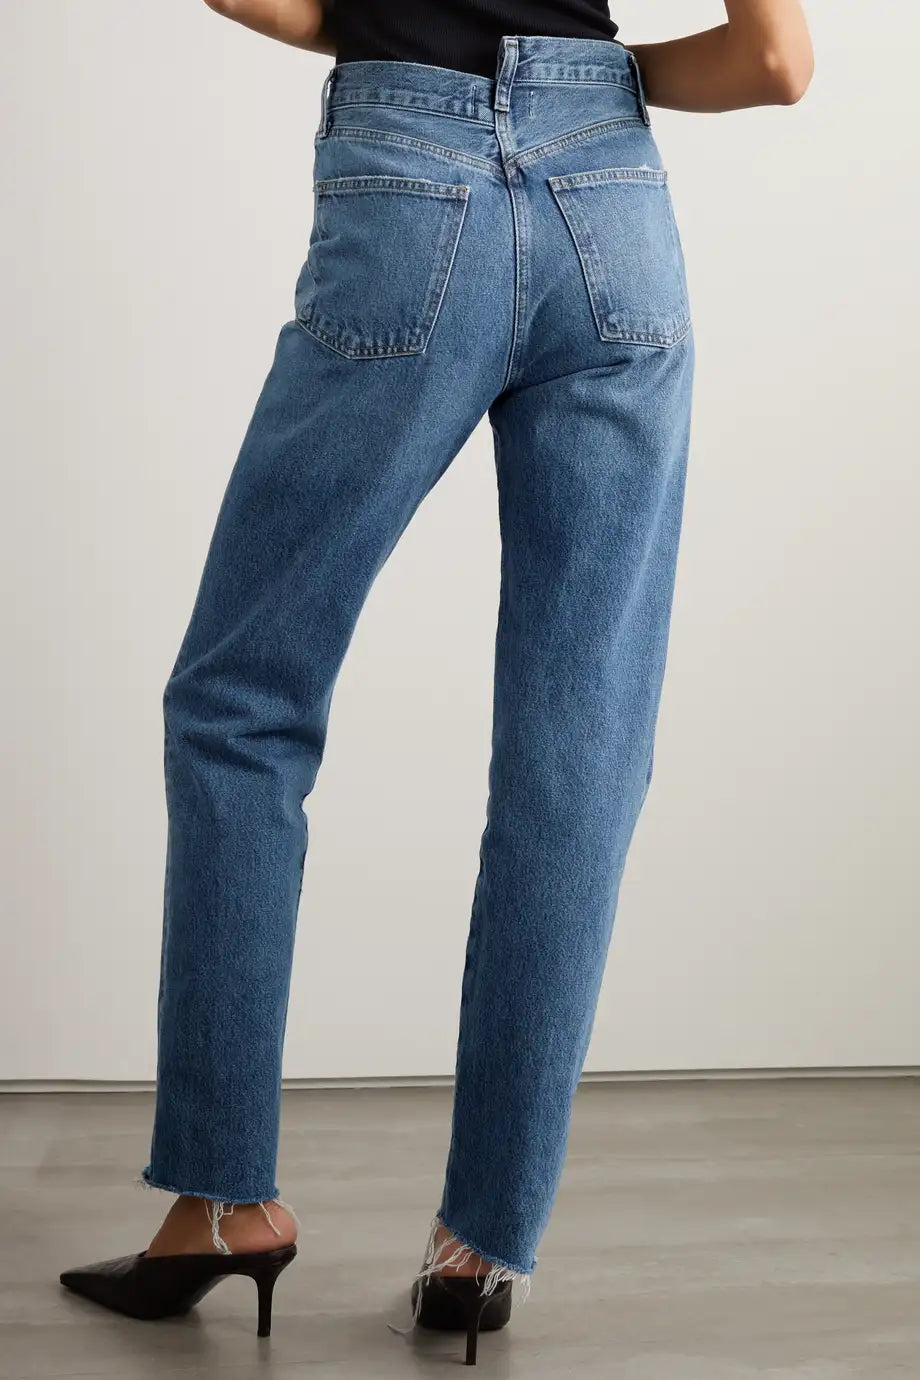 Criss Cross Jeans in Control